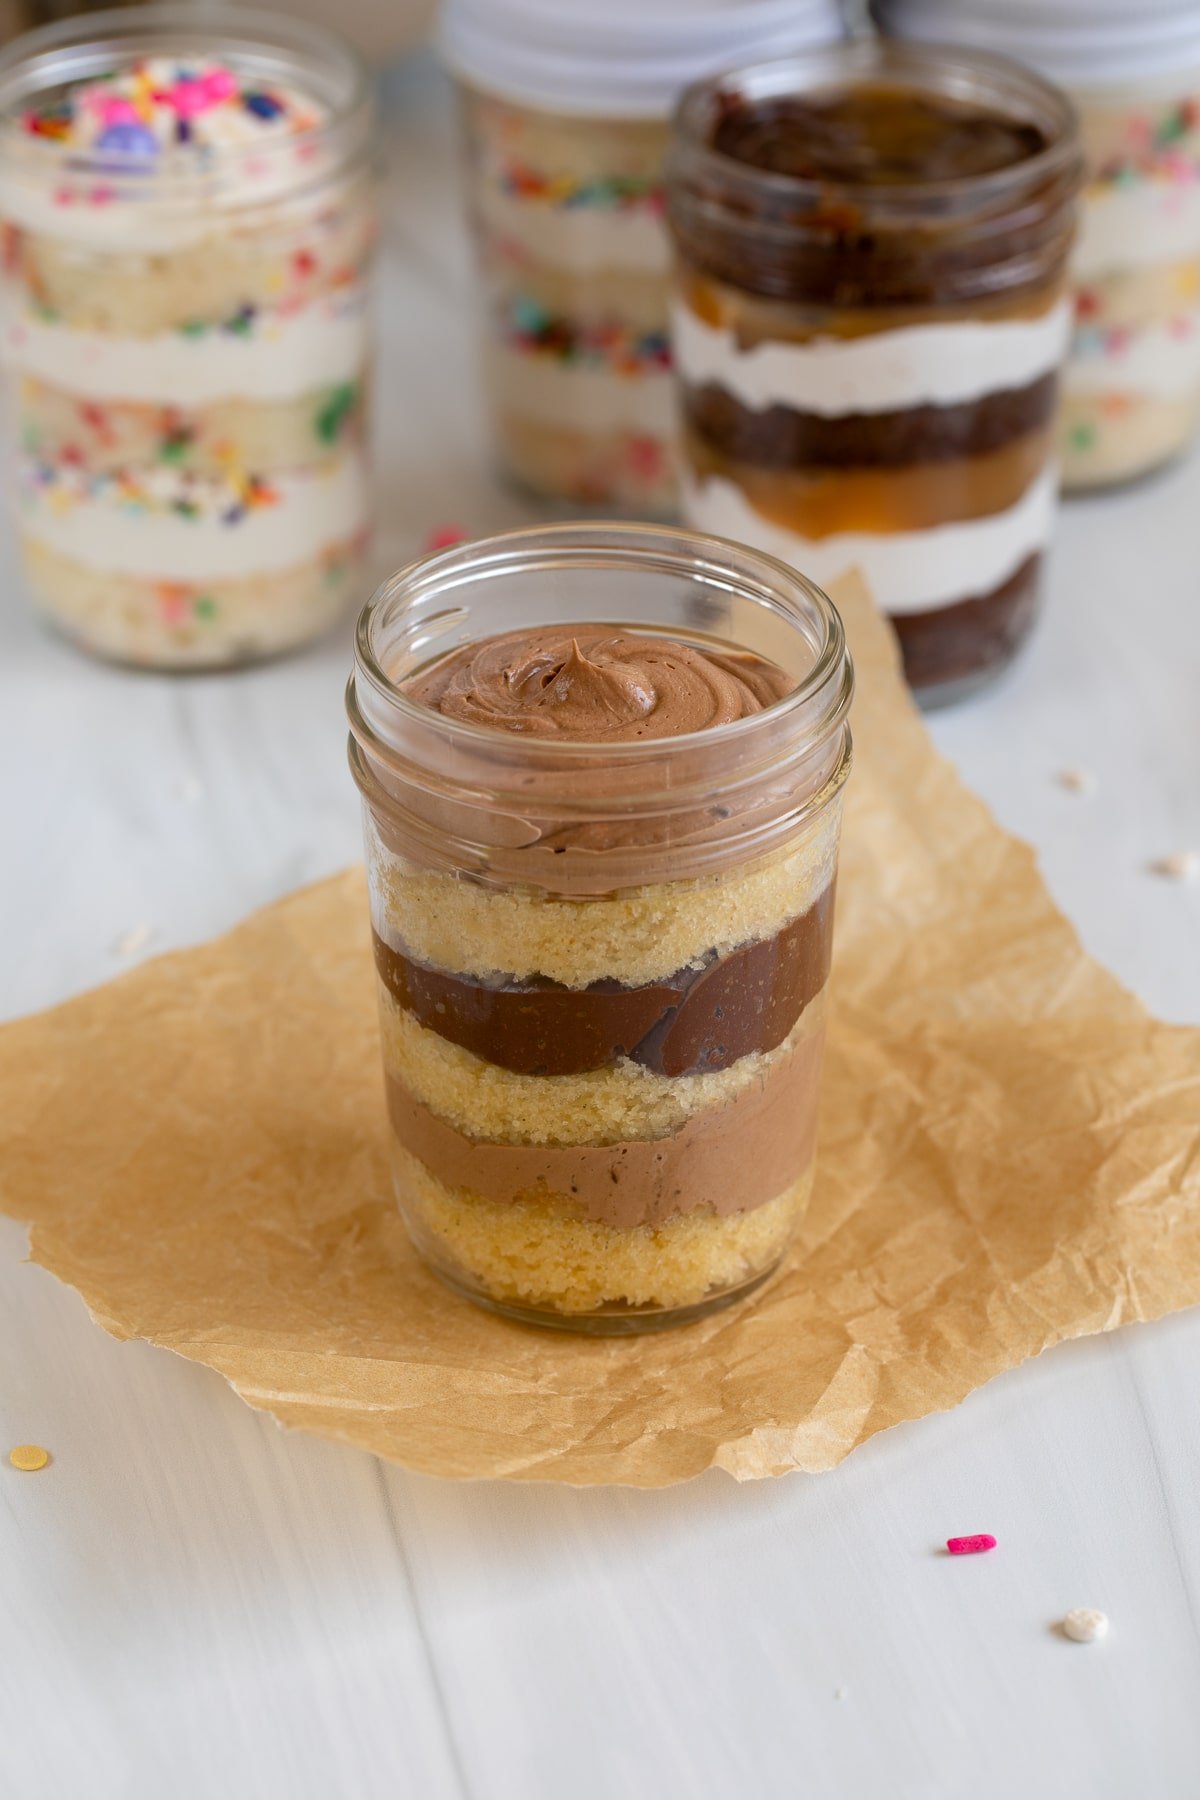 brown butter and chocolate jar cake.